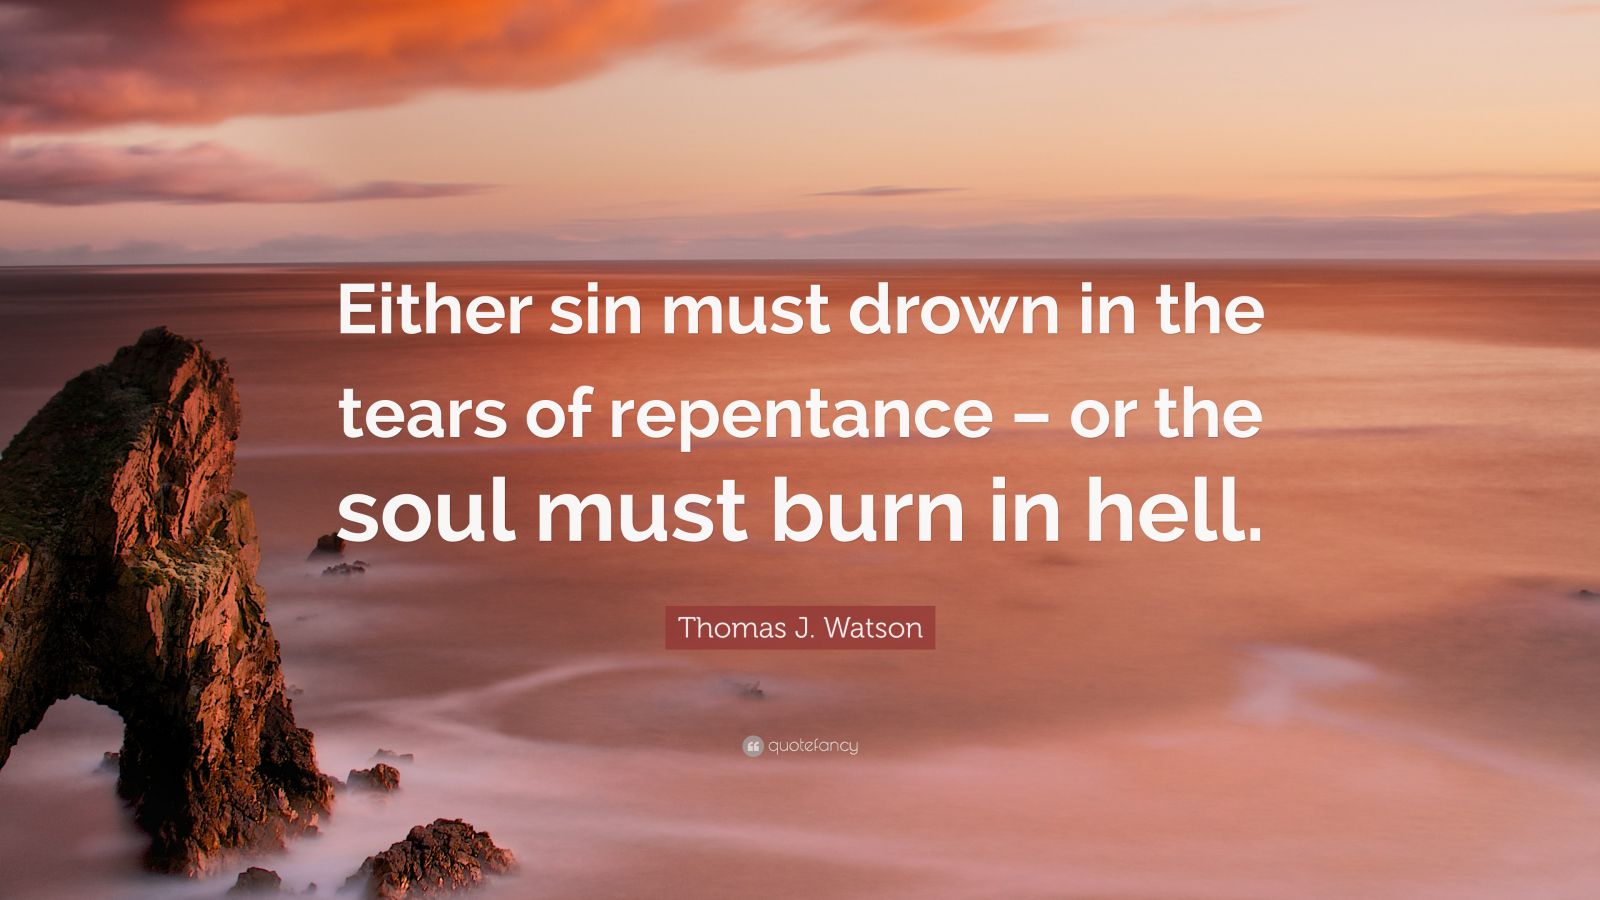 Thomas J. Watson Quote: “Either sin must drown in the tears of repentance –  or the soul must burn in hell.”